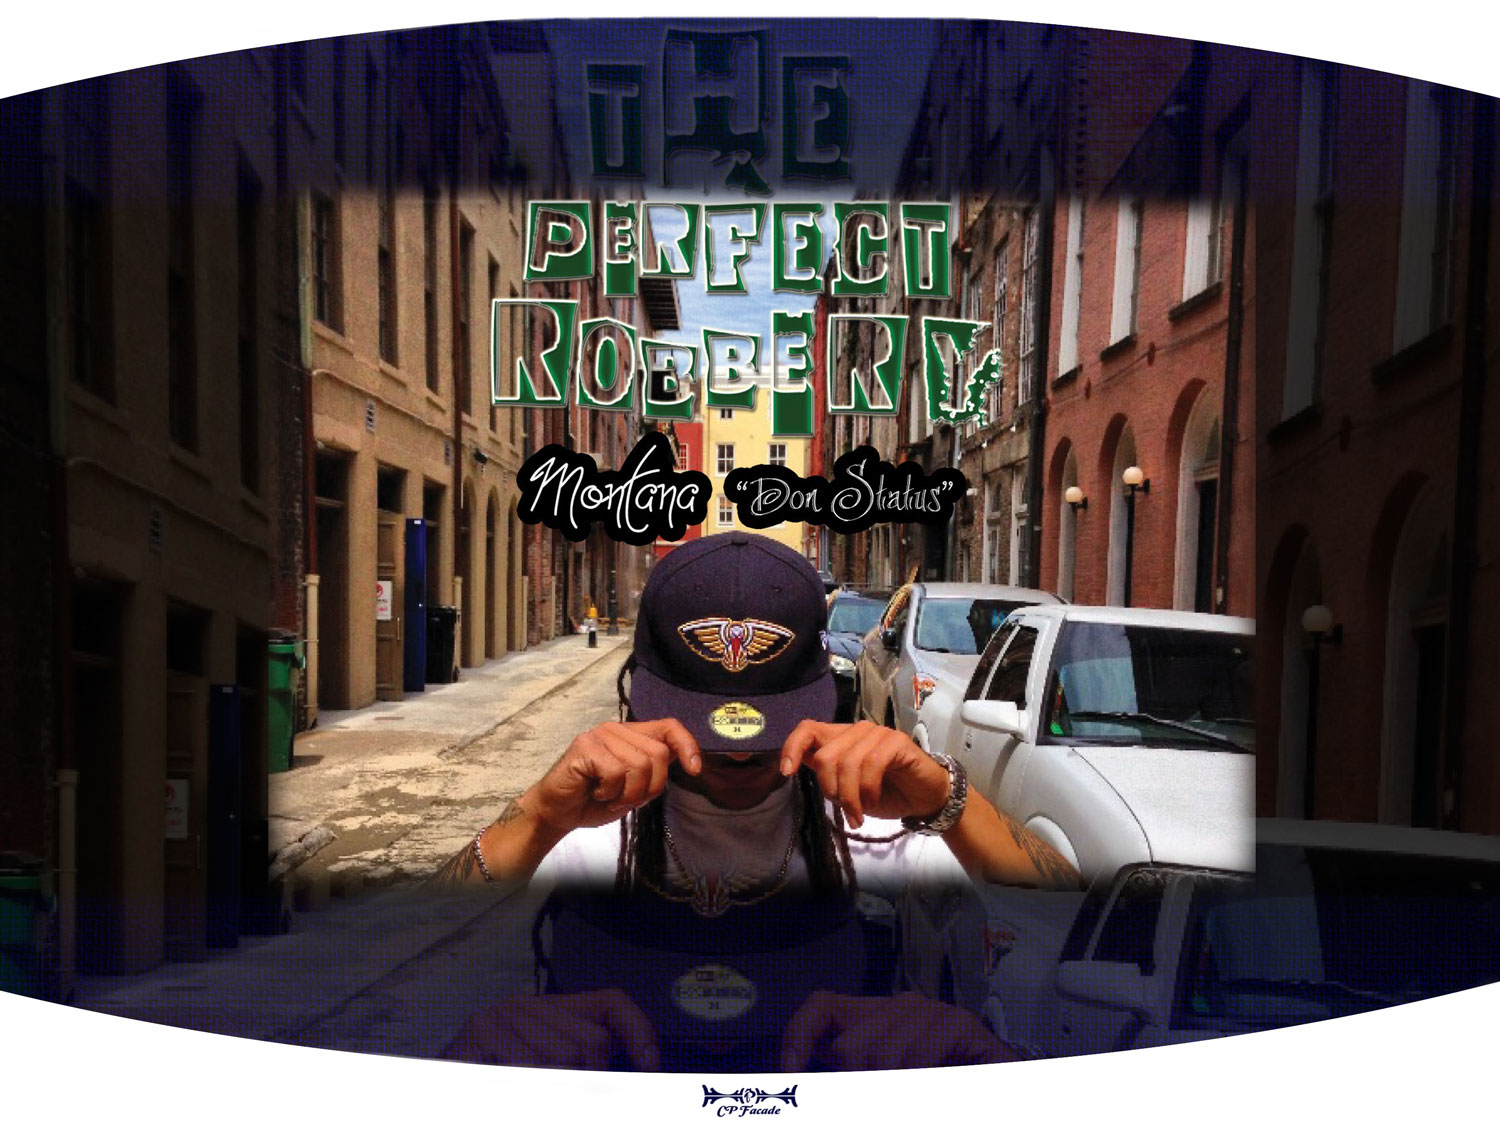 Music Artiist Montana standing in the street with a New Orleans pelicans fitted hat on. With the title for his album The Prefect Robbery behind him